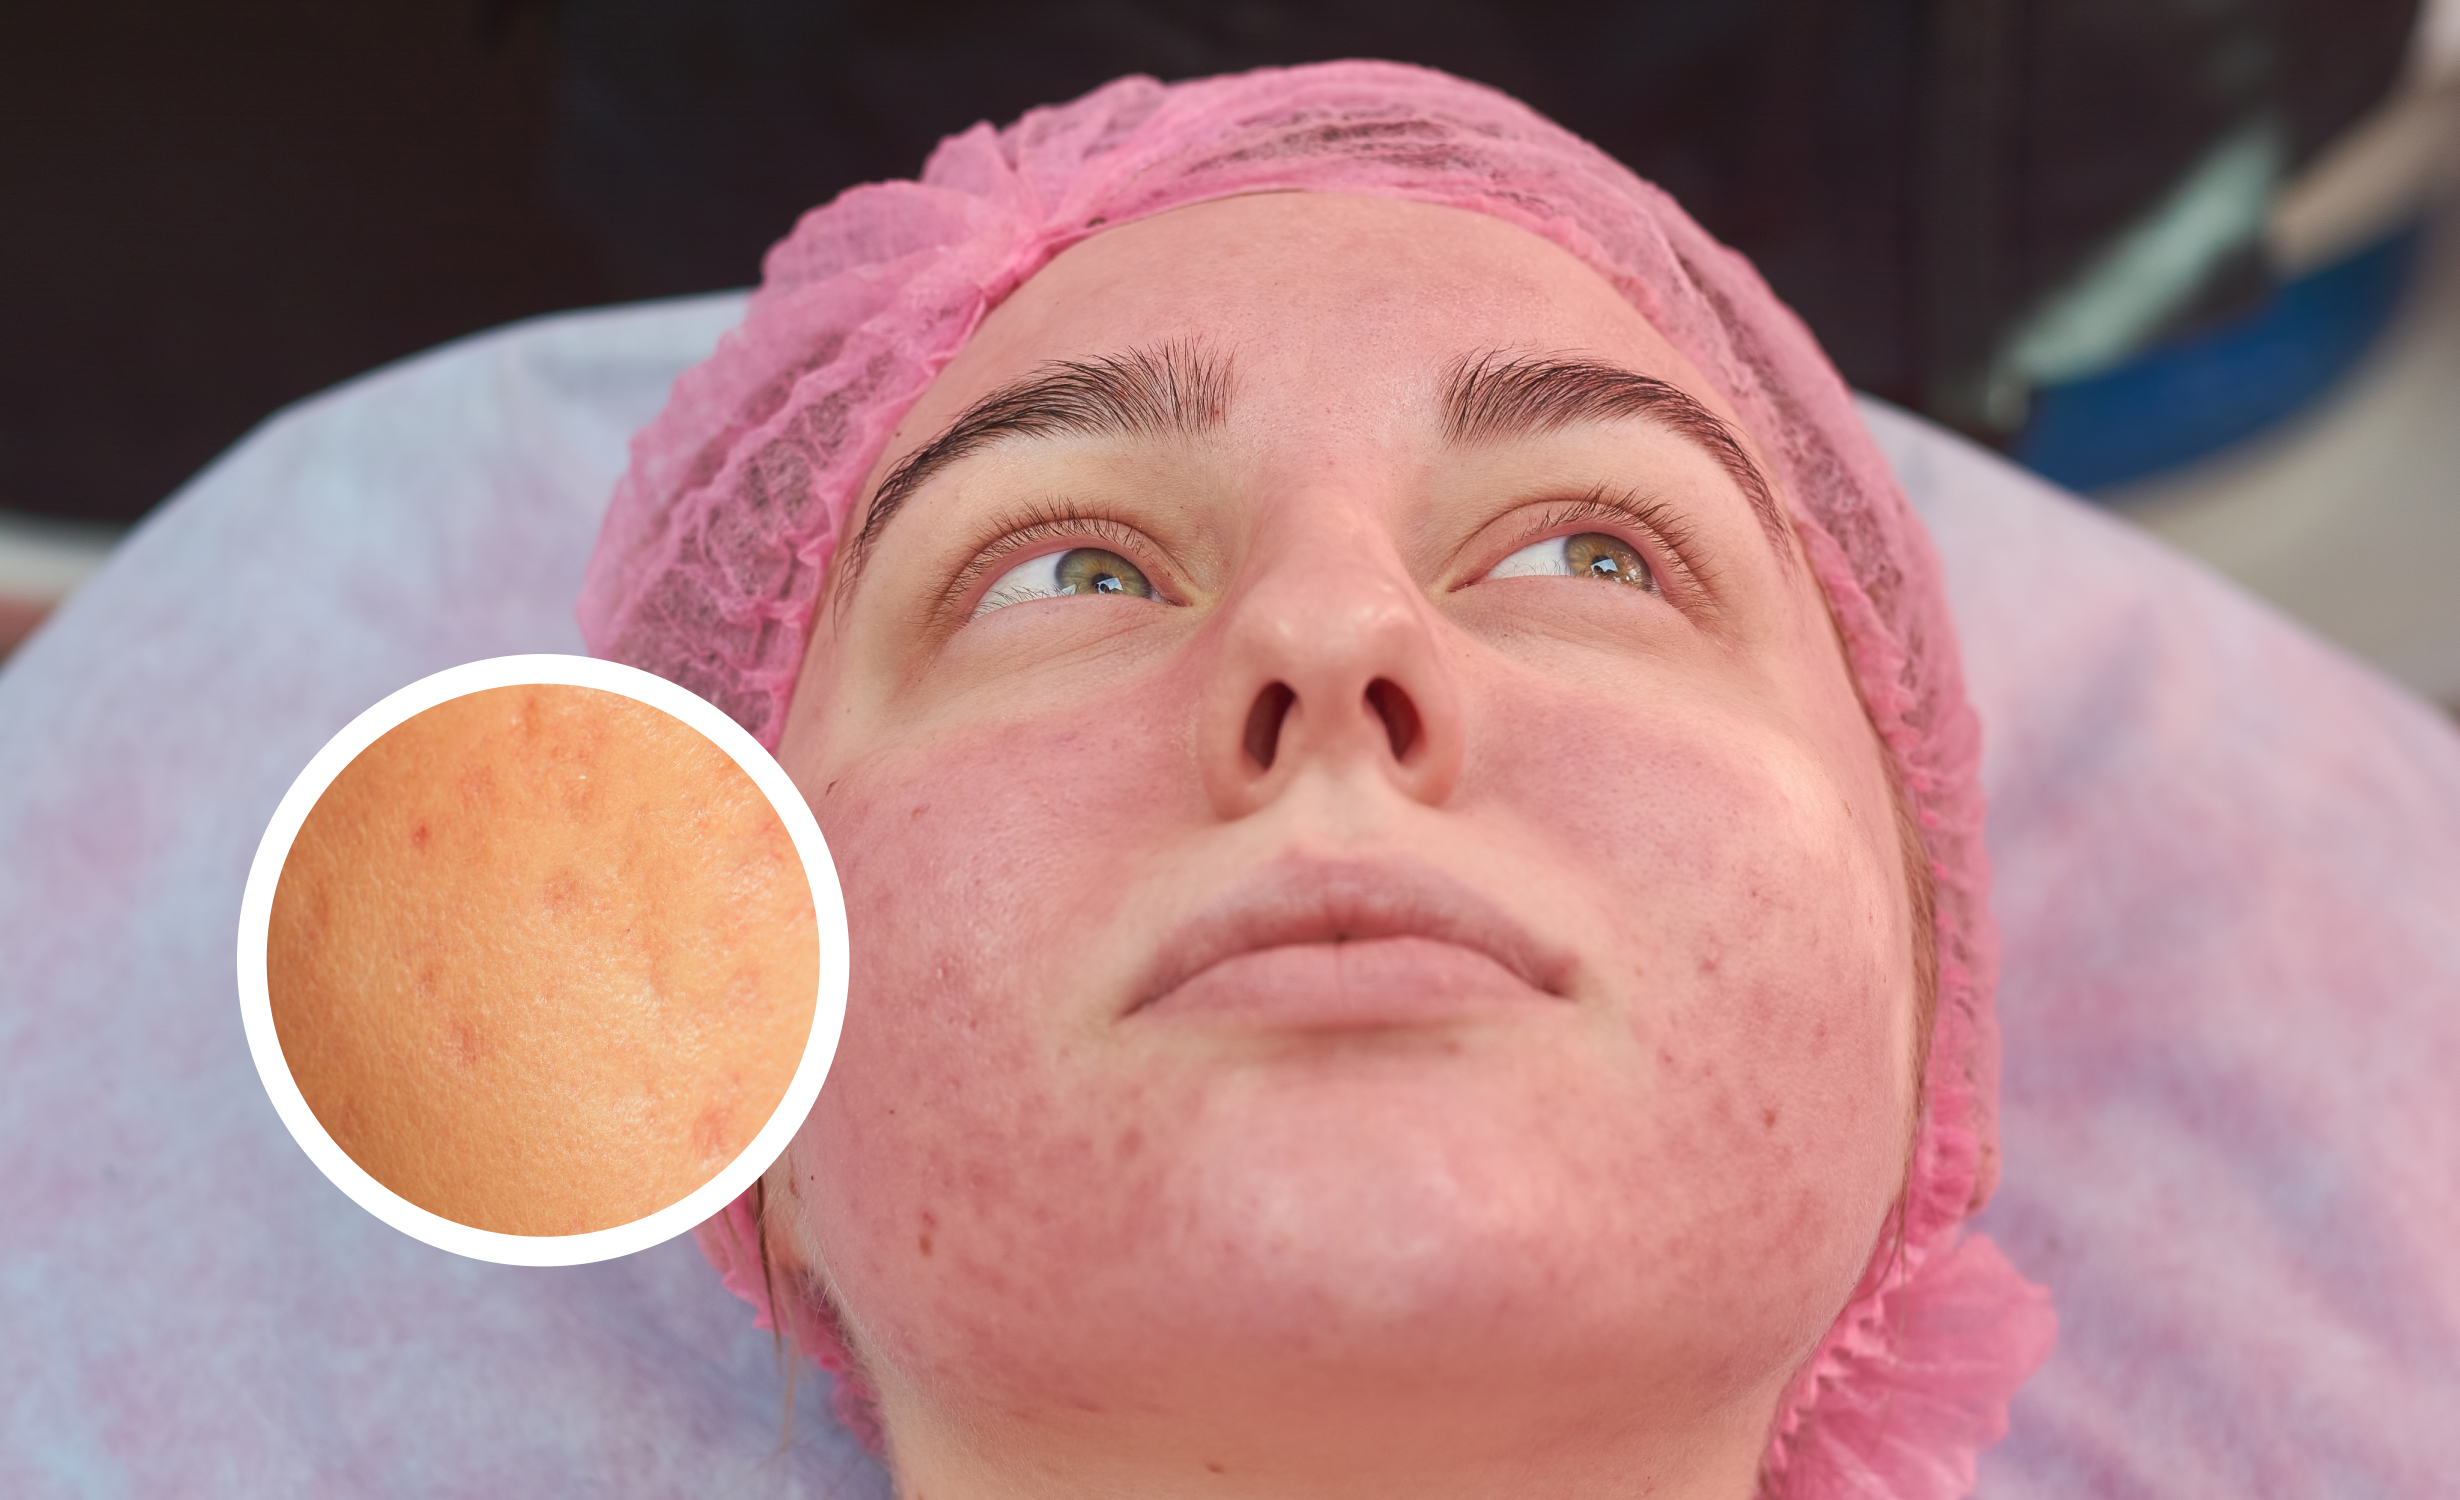 A close-up of a young woman lying down, showing redness and flushing on her face. She wears a pink head cover. An inset magnifies a section of her irritated skin, highlighting the texture and redness.